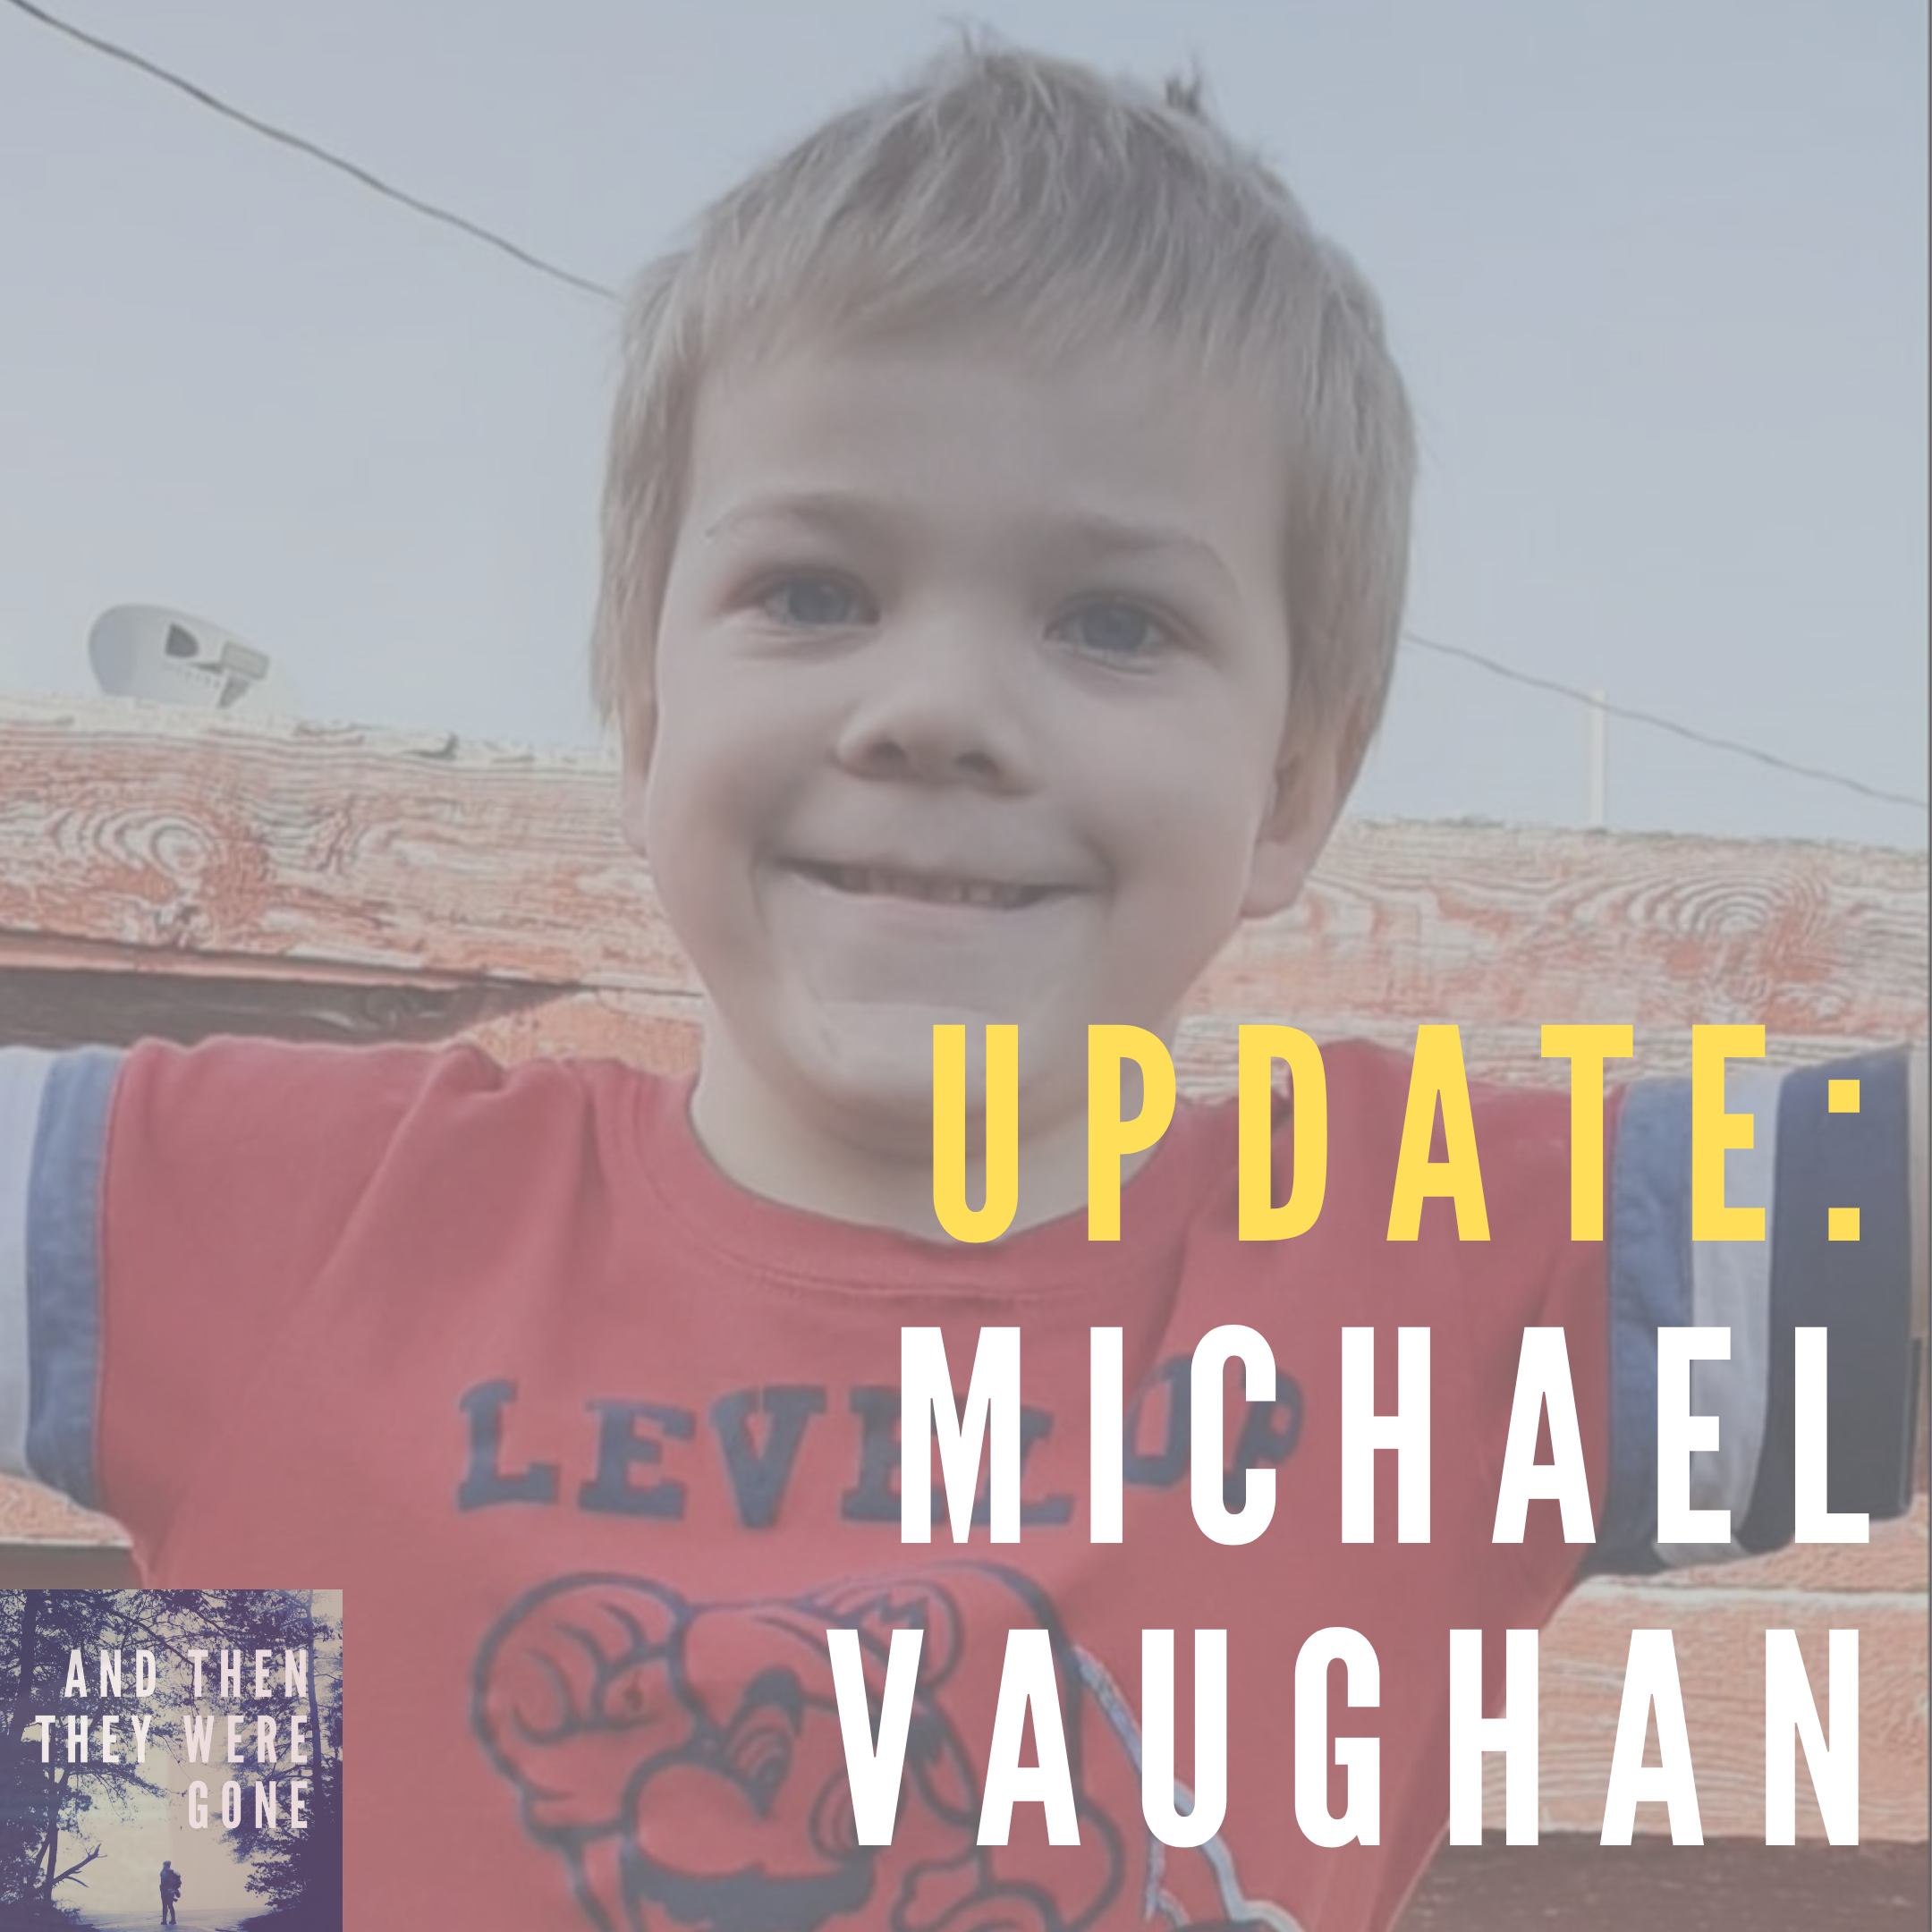 An arrest was made in Michael Vaughan's case on November 11, 2022